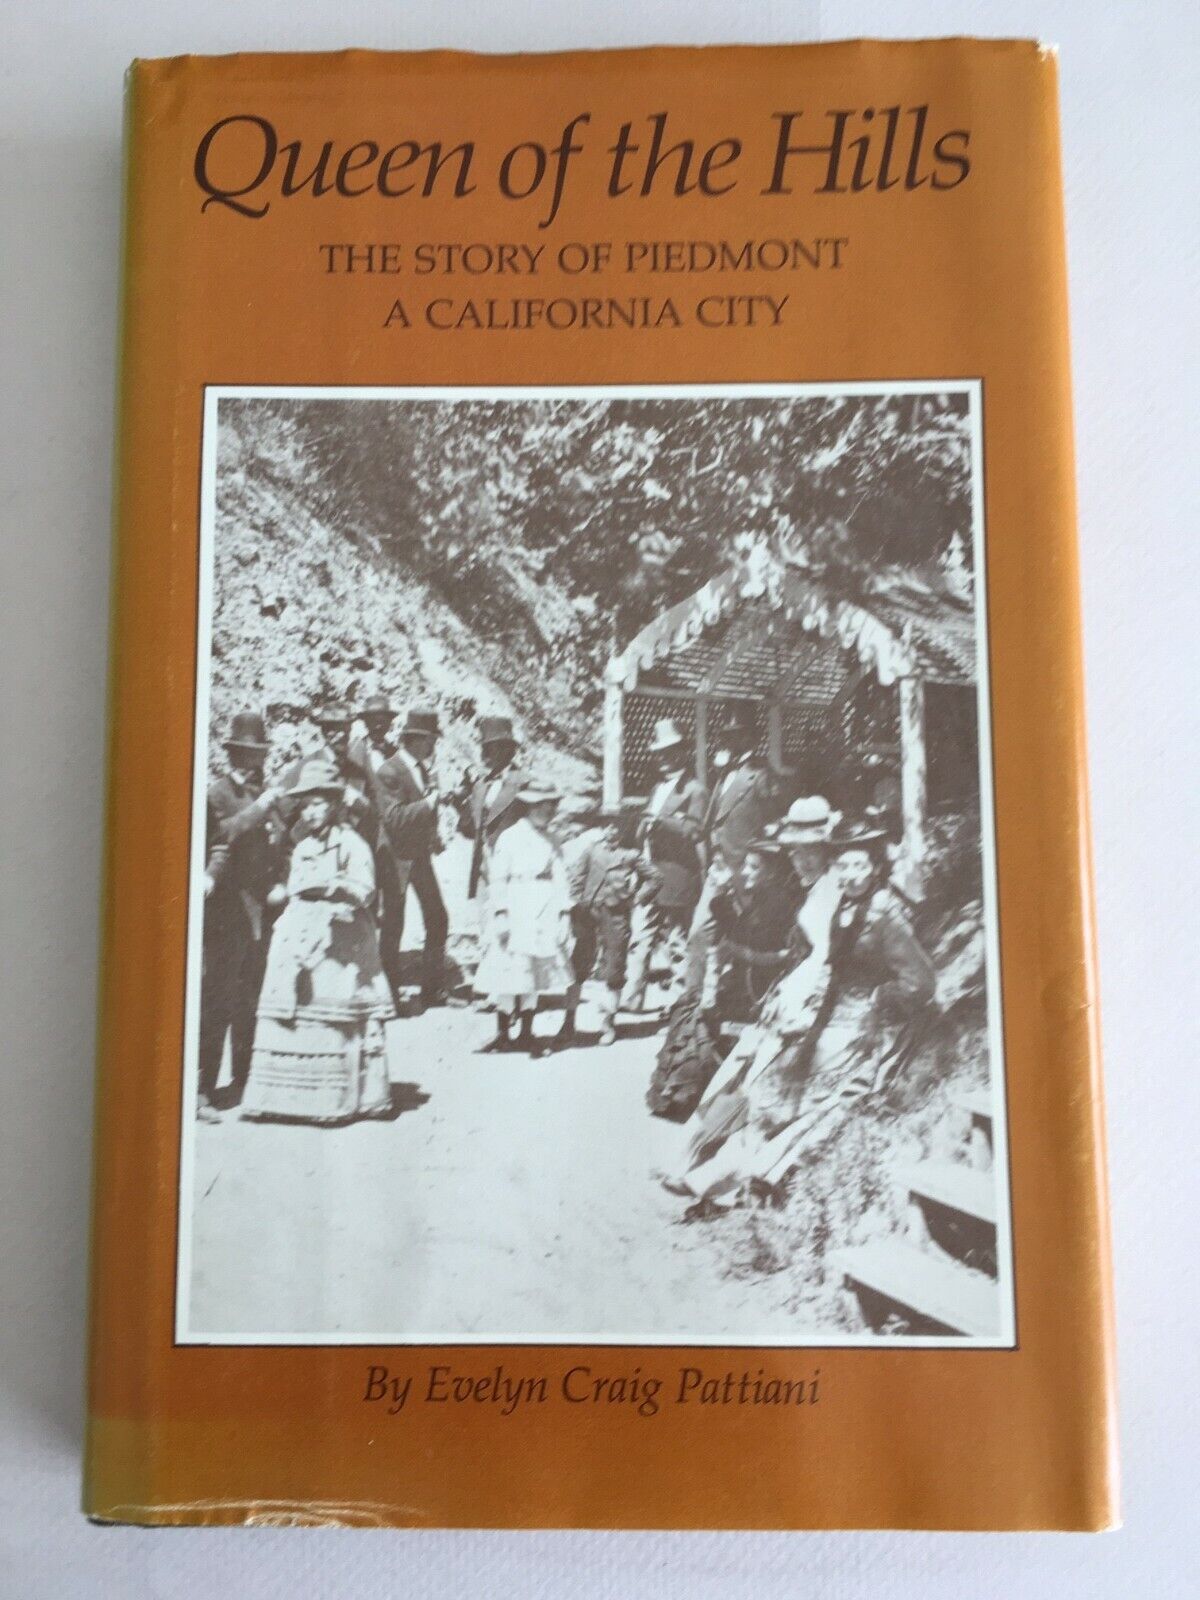 STORY of PIEDMONT ~ CALIFORNIA City ~ Queen of the Hills by E Pattiani ~ Oakland